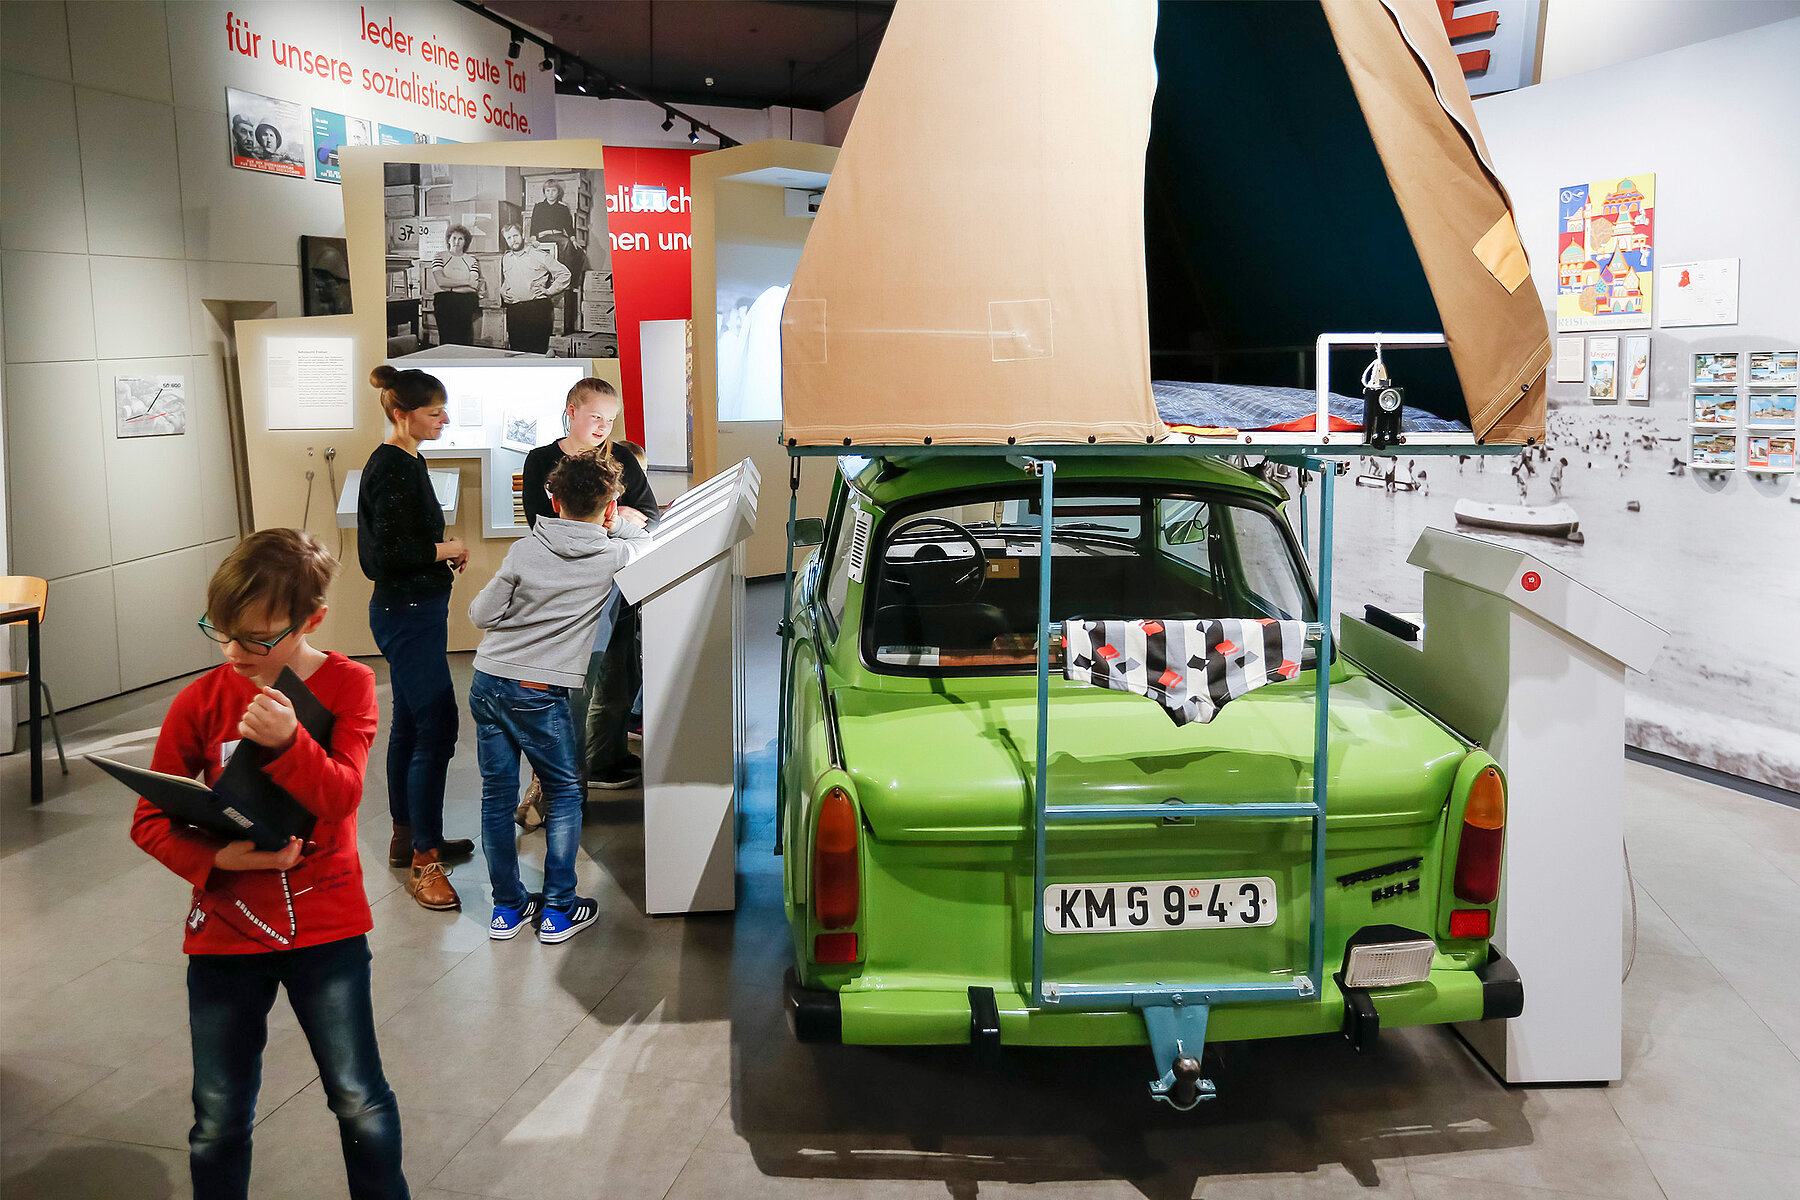 The exhibition of the museum in the Kulturbrauerei. On the left side of the picture are children, on the right side is a green Trabi with a tent on the roof.